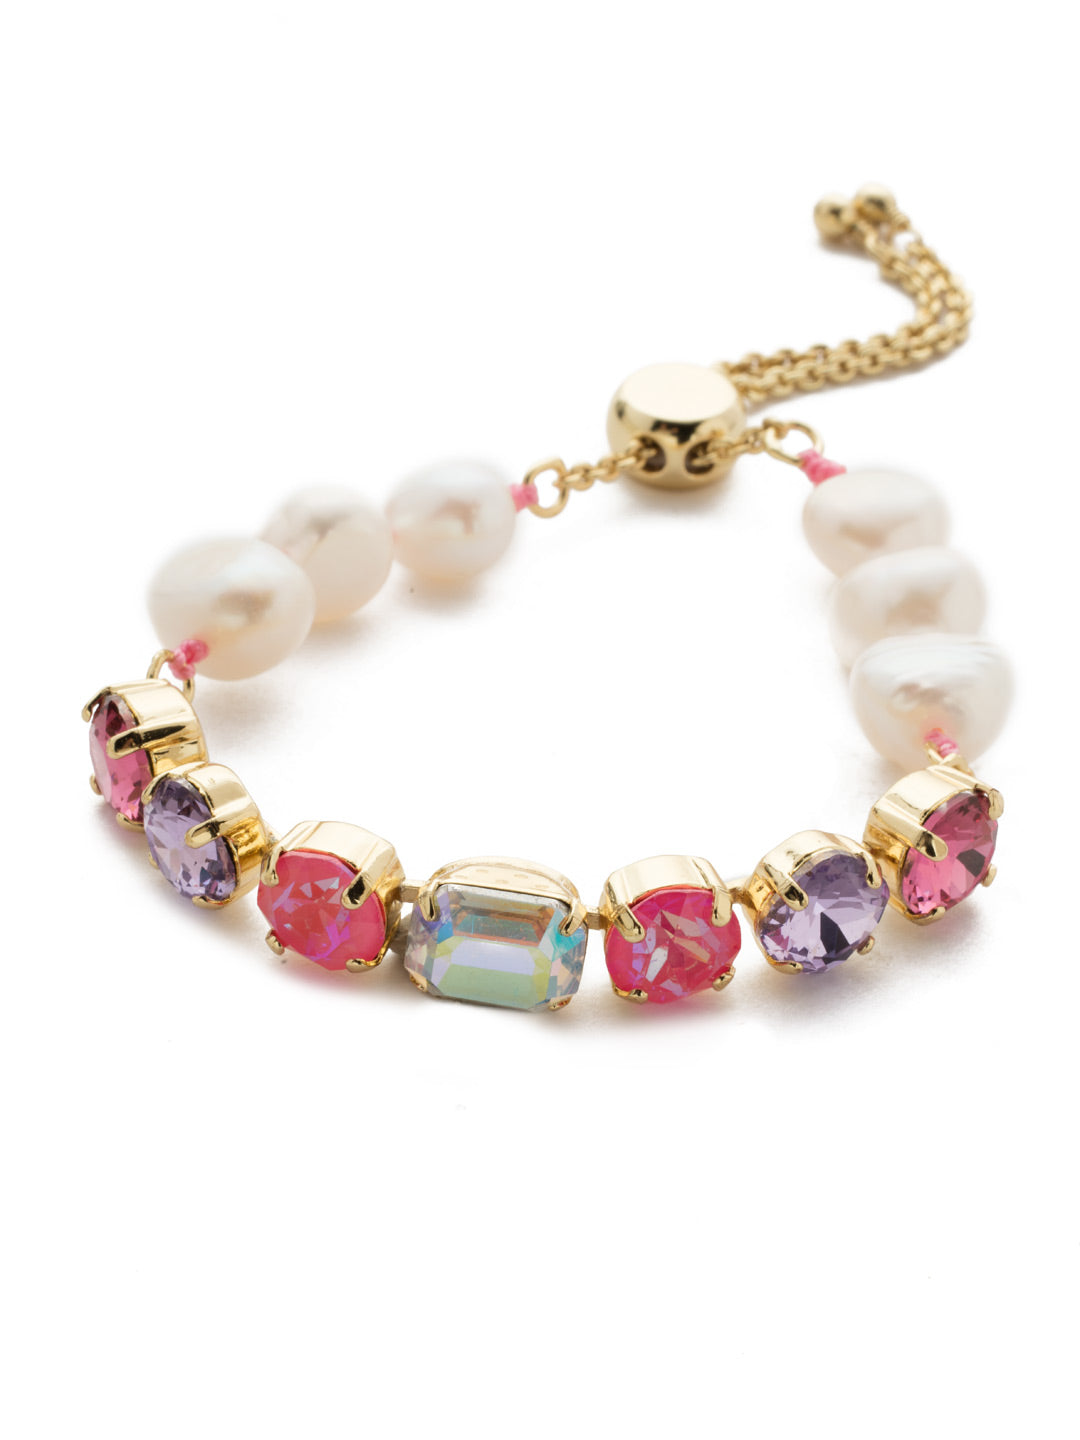 Cadenza Slider Bracelet - BEC14BGISS - <p>A classic line bracelet reimagined with a adjustable slider clasp. A pattern of crystals and pearls give this bracelet all around allure. From Sorrelli's Island Sun collection in our Bright Gold-tone finish.</p>